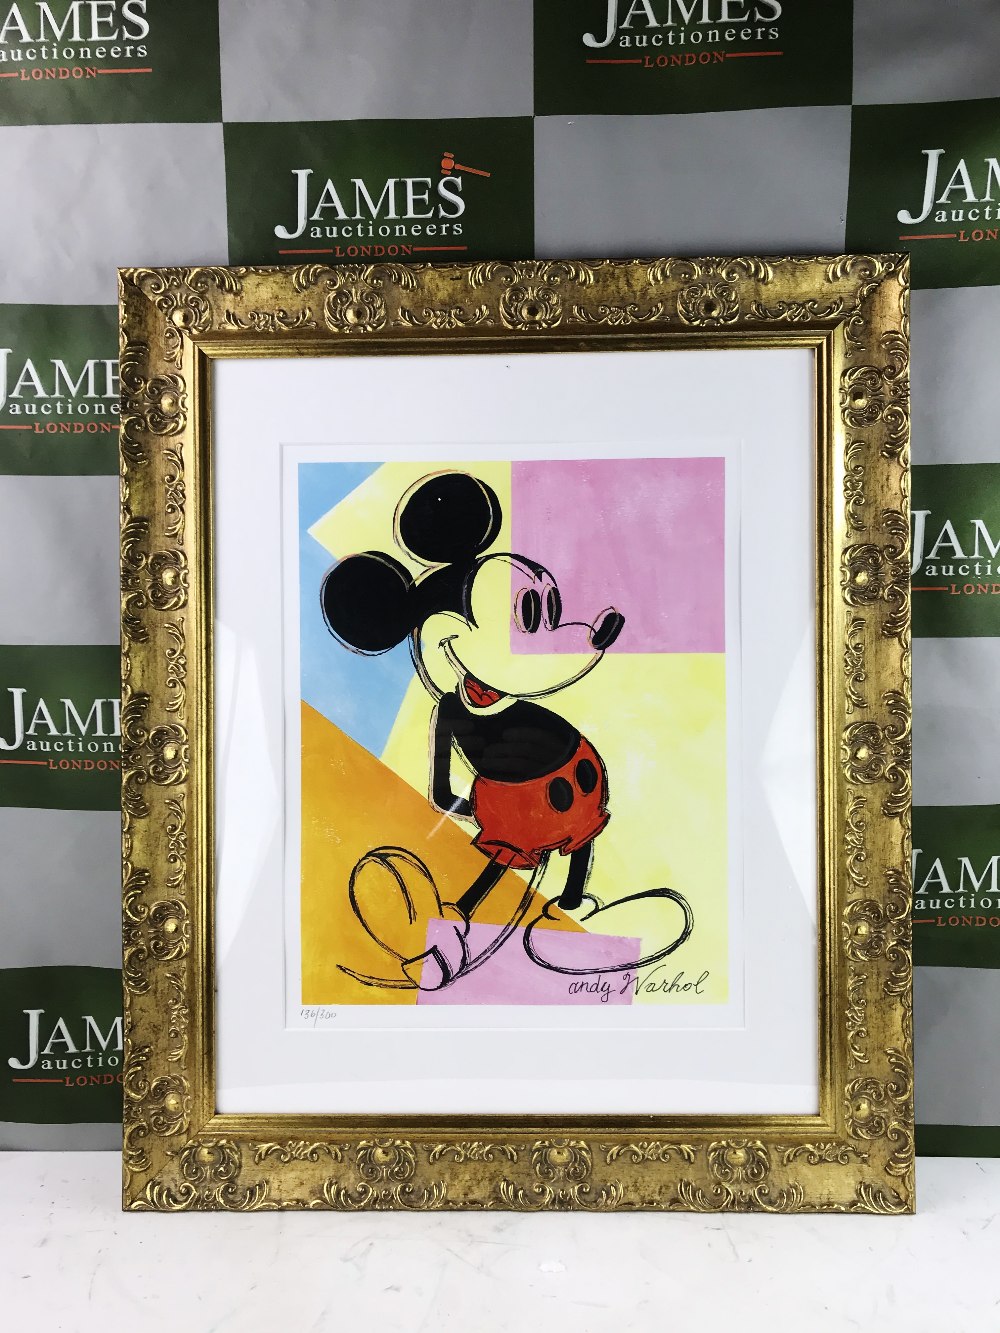 Andy Warhol "Mickey" Lithograph-Ornate Framed, Certificated Plate Signed Edition - Image 4 of 4